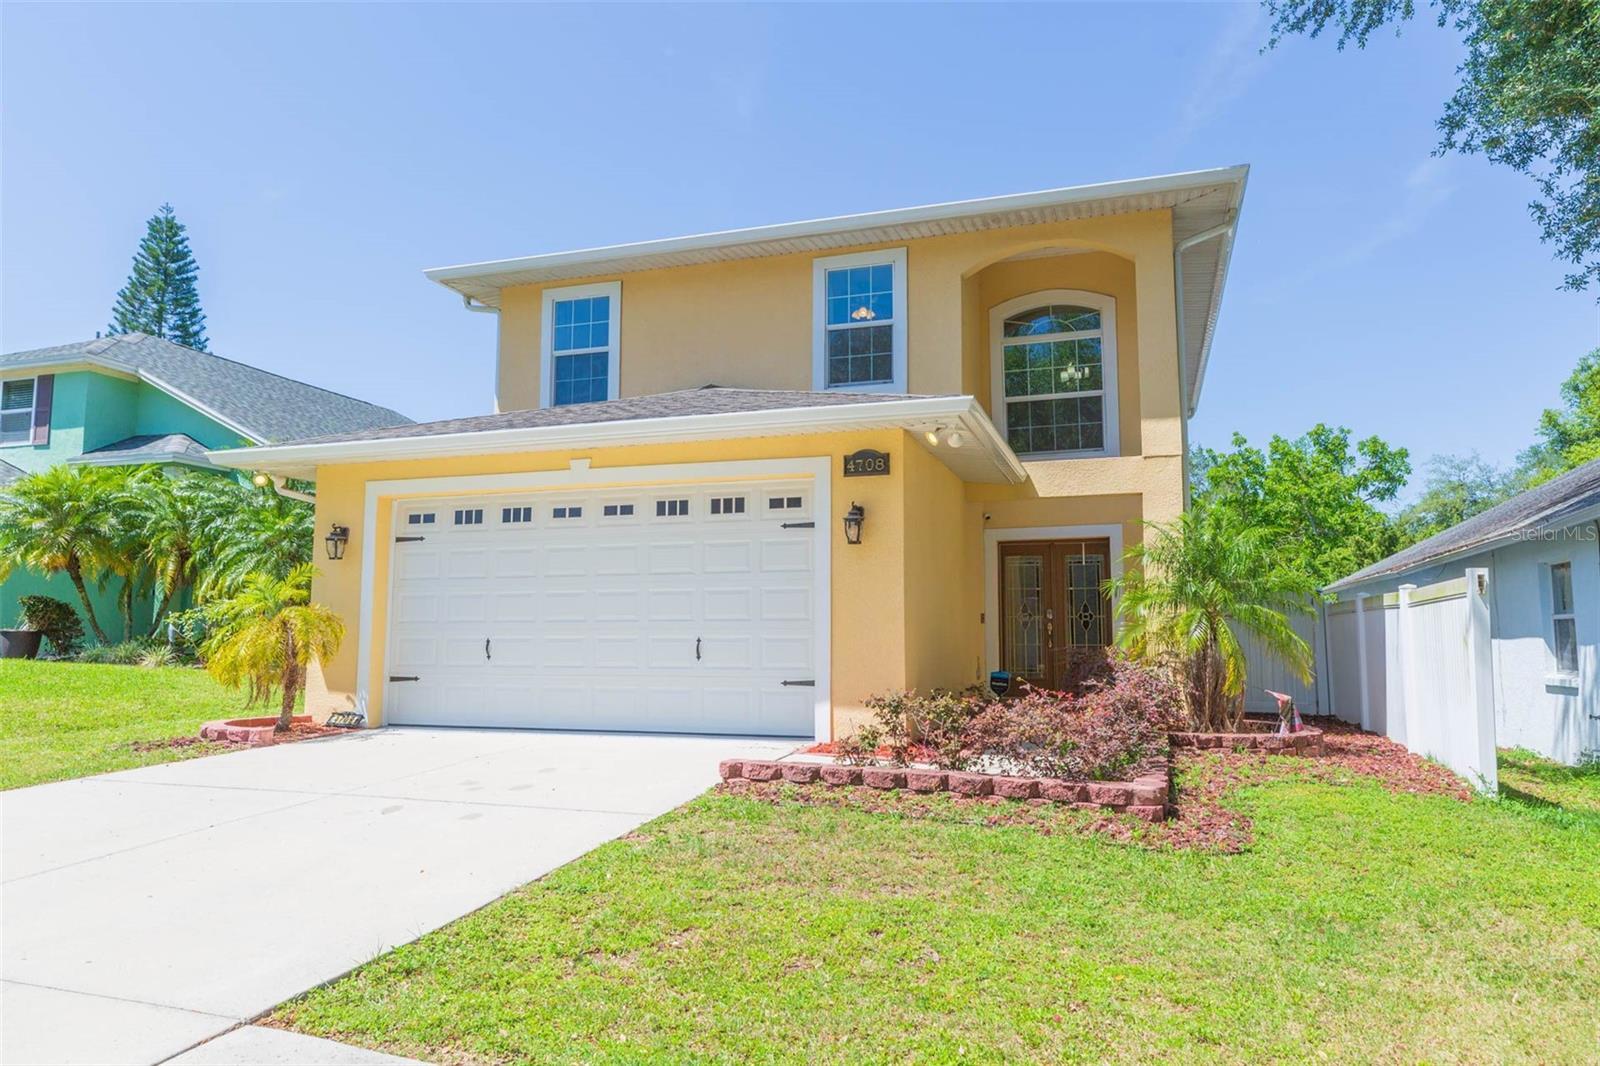 Photo one of 4708 Dunquin Pl Tampa FL 33610 | MLS T3519394